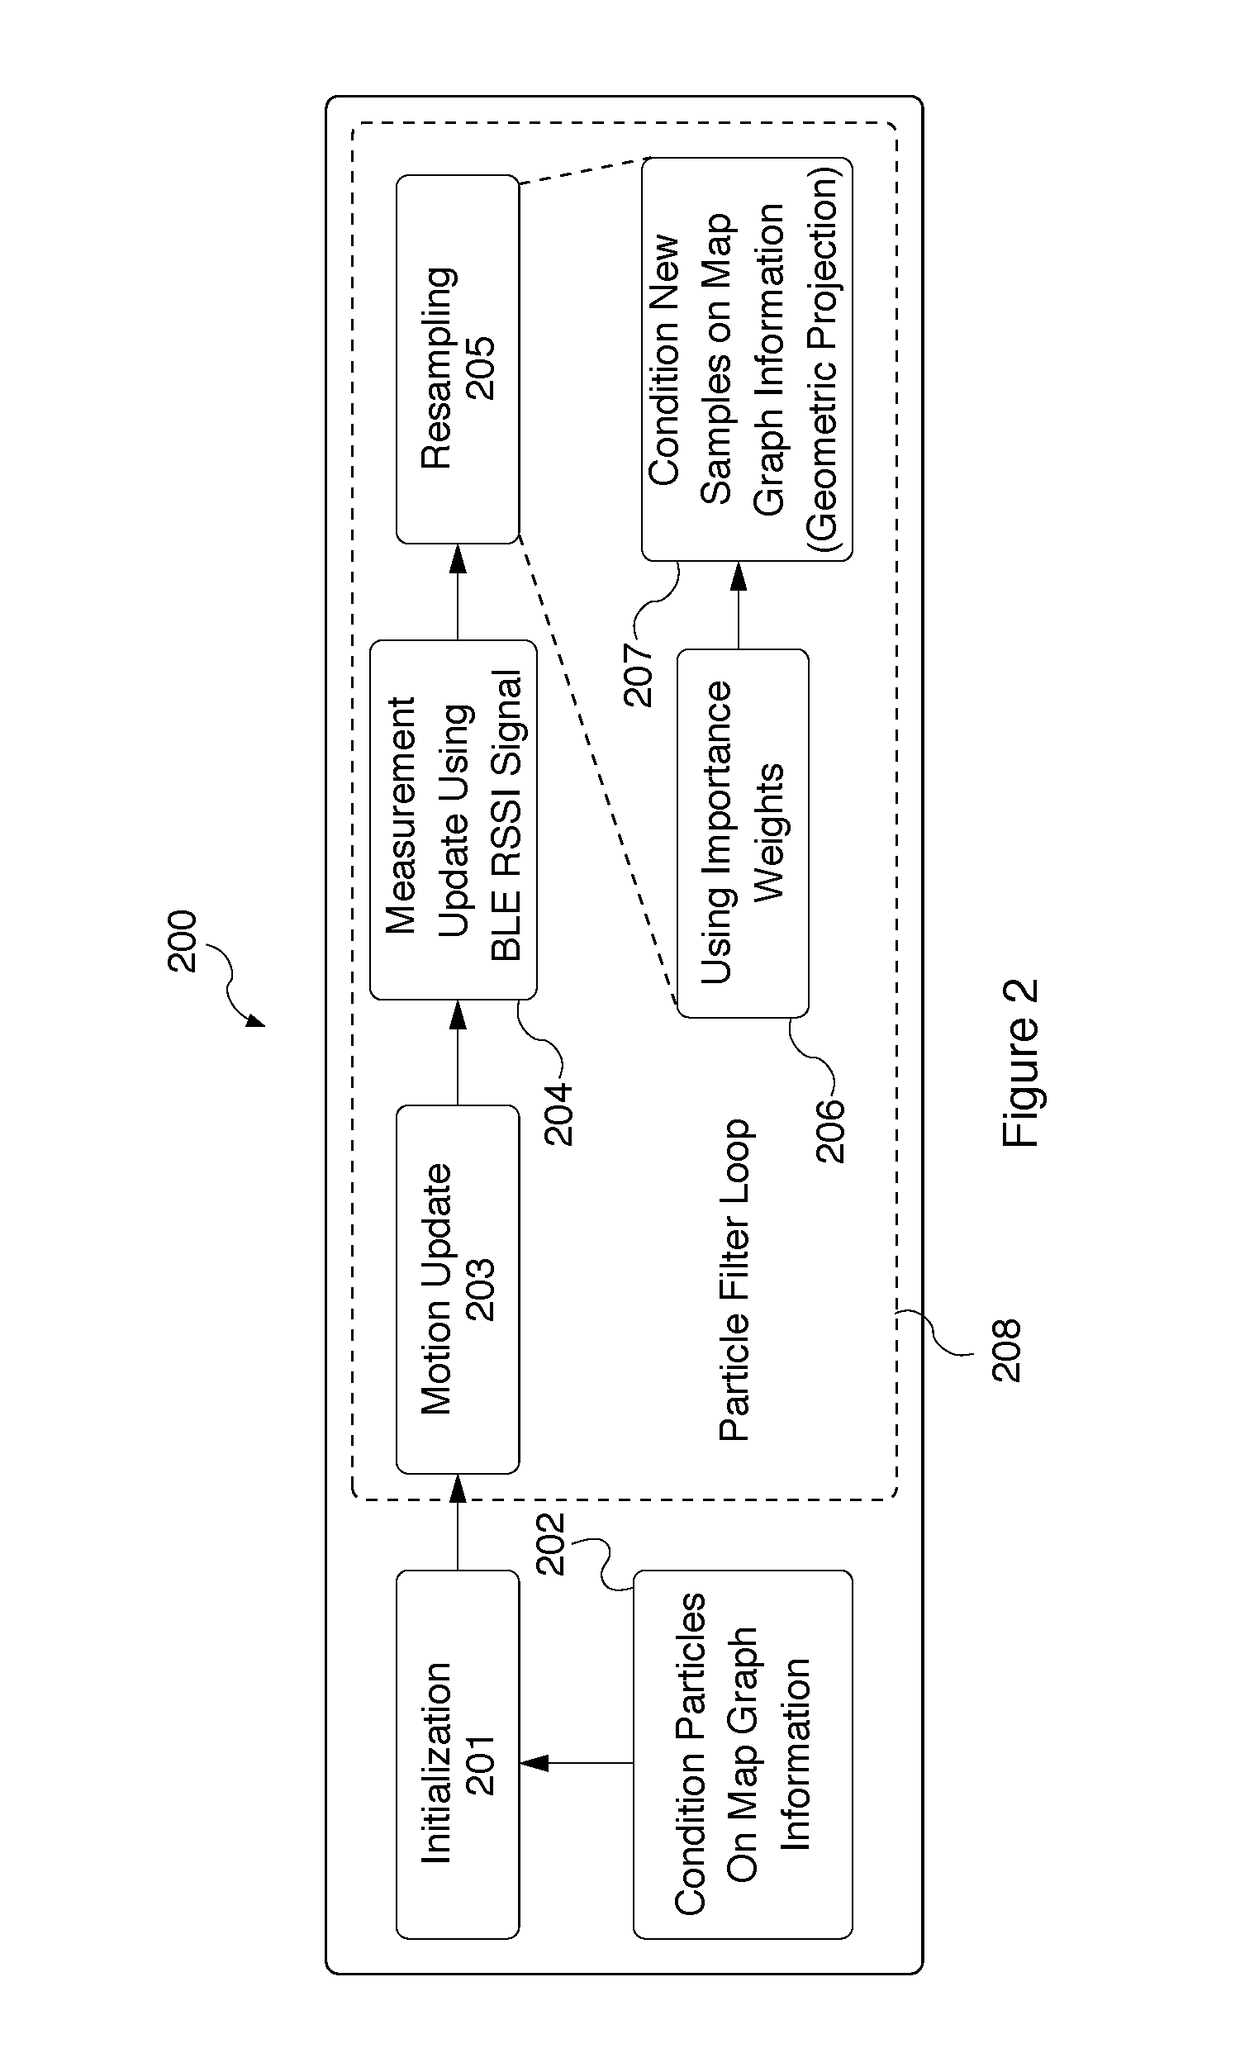 Systems and methods for utilizing graph based map information as priors for localization using particle filter